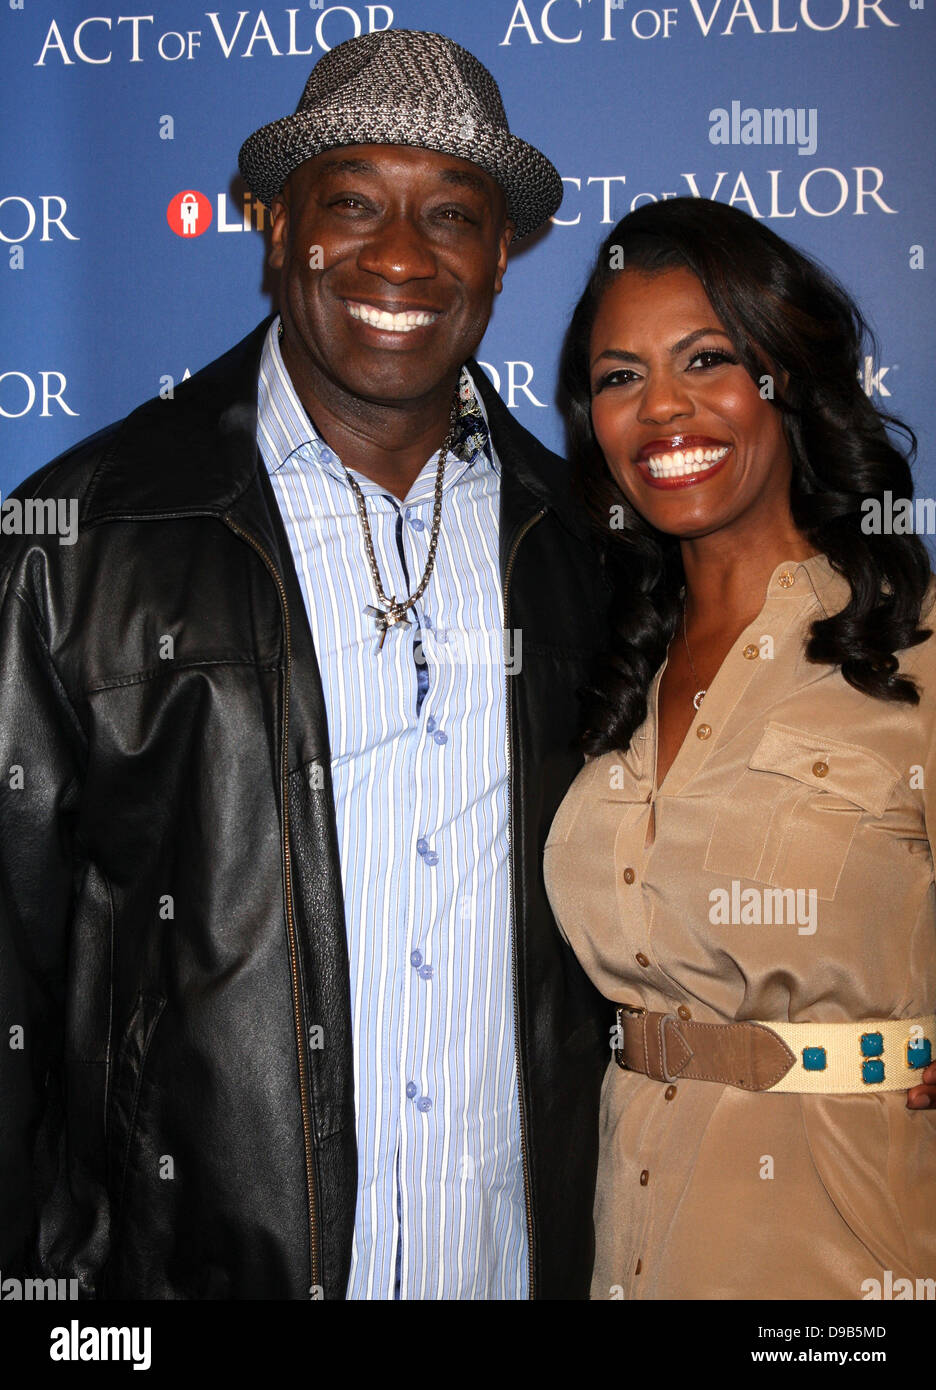 Michael Clarke Duncan and Omarosa Manigault-Stallworth The Los Angeles premiere of 'Act Of Valor' at the ArcLight cinema - Arrivals Los Angeles, California - 13.02.12 Stock Photo